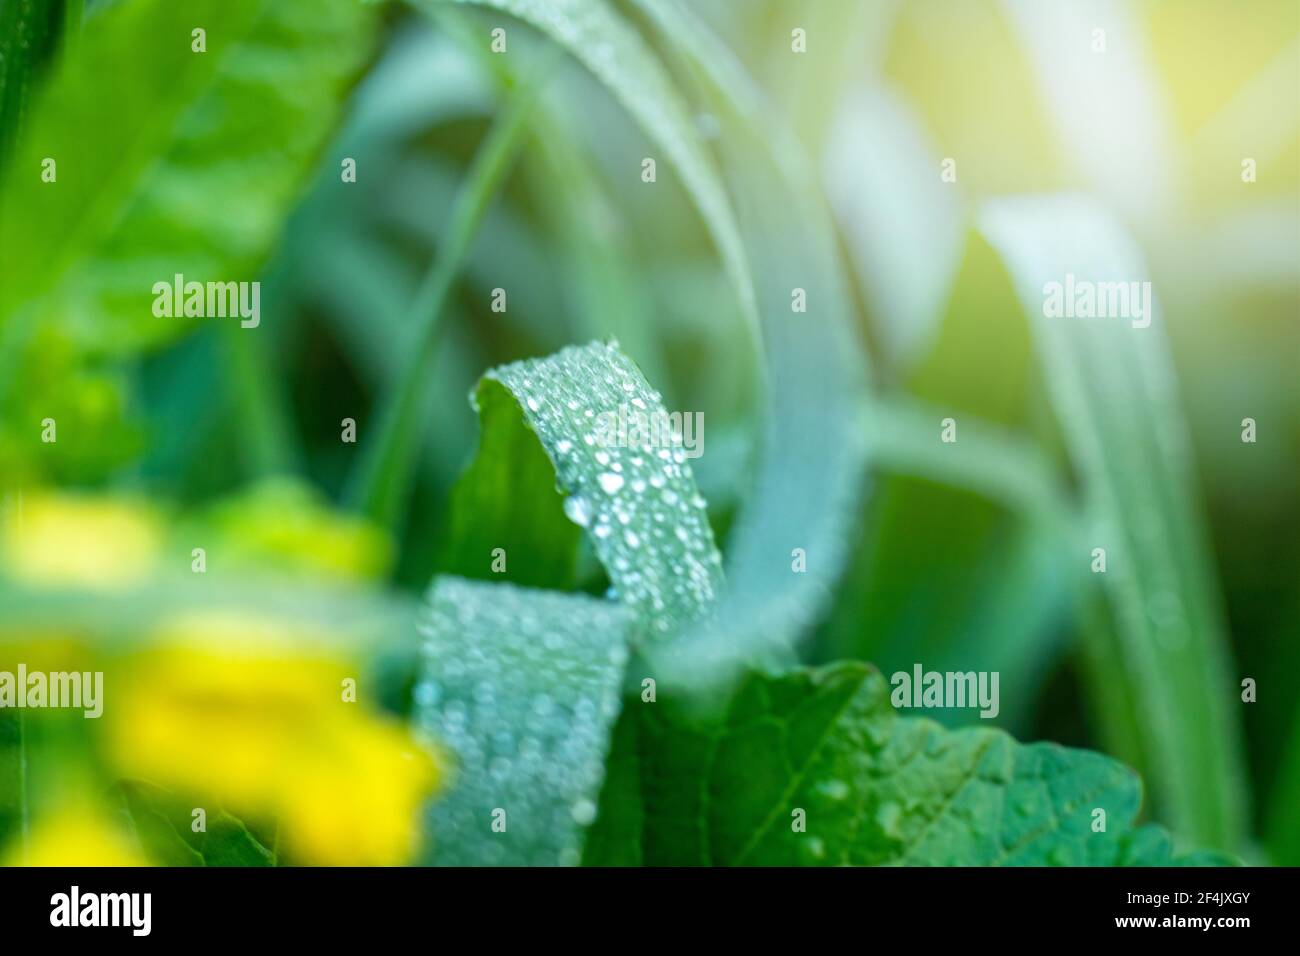 water drops on leaf with greenery fresh background, Corn field agriculture. Green nature. Rural farm land Stock Photo